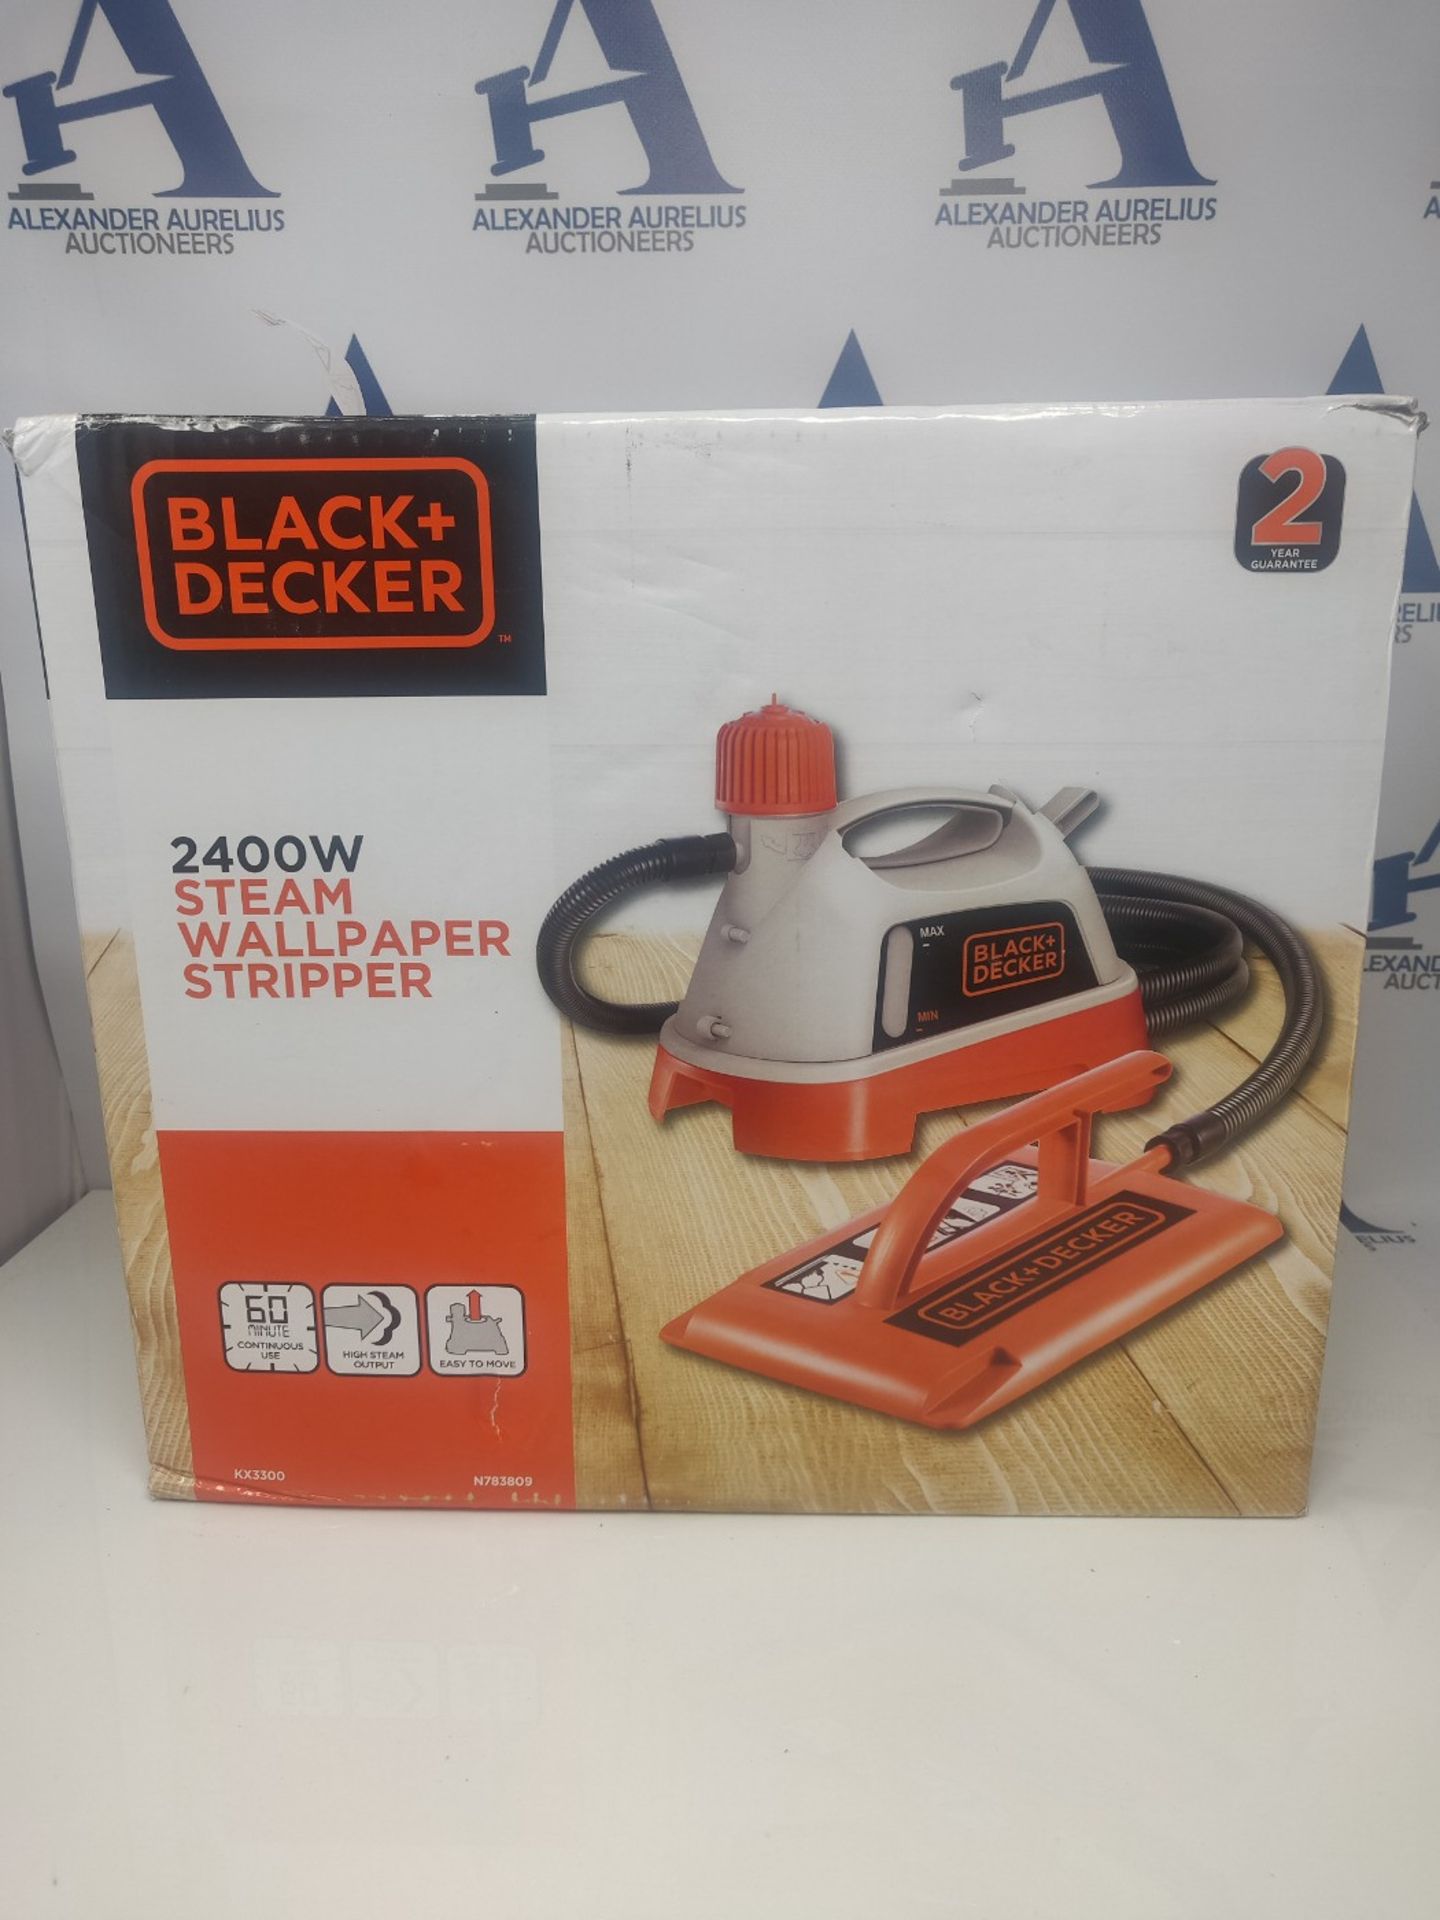 BLACK+DECKER 2400 W Wallpaper Steamer Stripper with Pad, Removes Vinyl, Multi-Layered, - Image 2 of 3